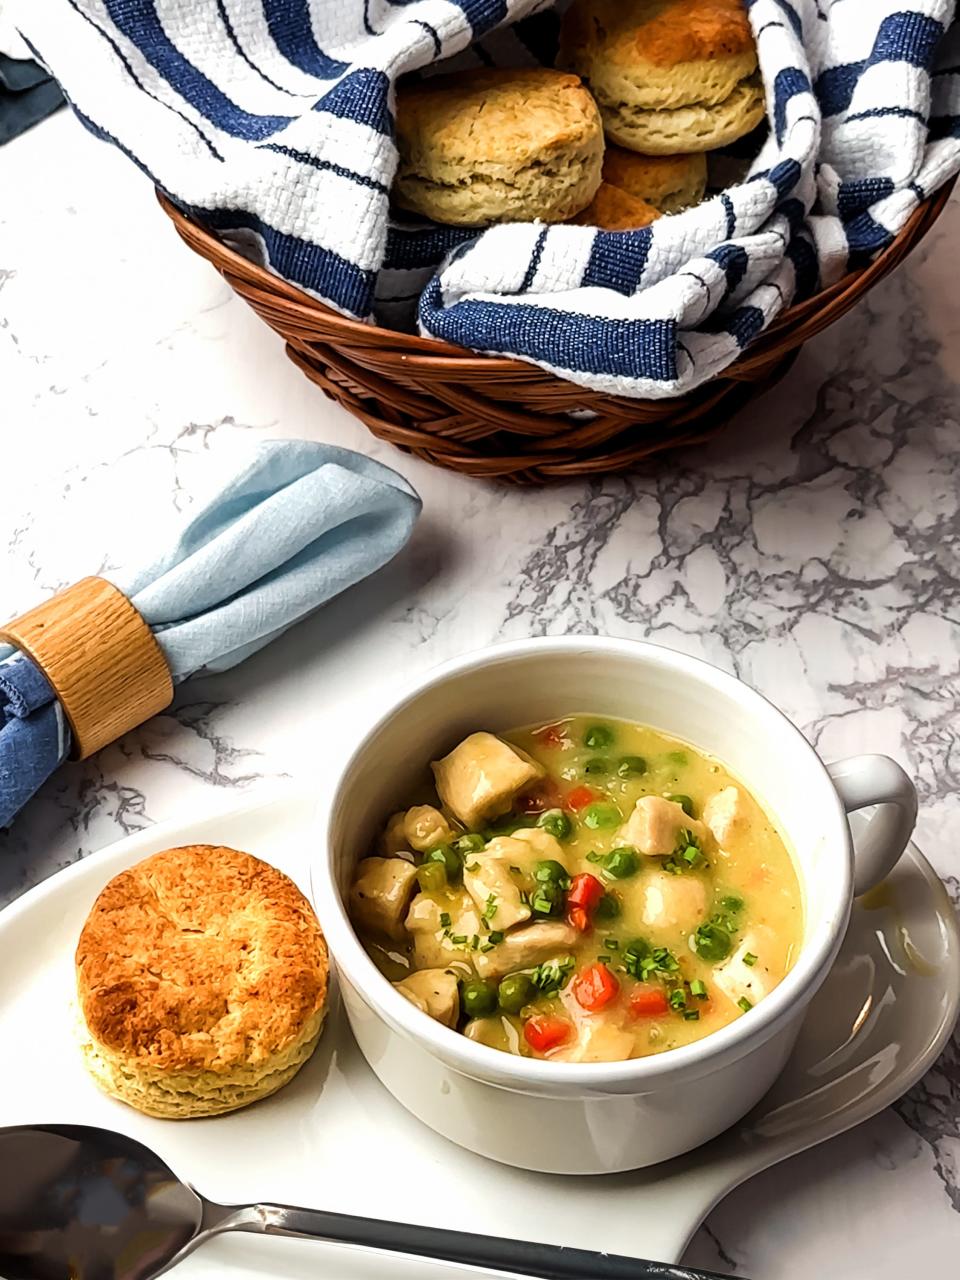 Serve the Chicken Stew over puff pasty shells or as a filling for chicken pot pie.